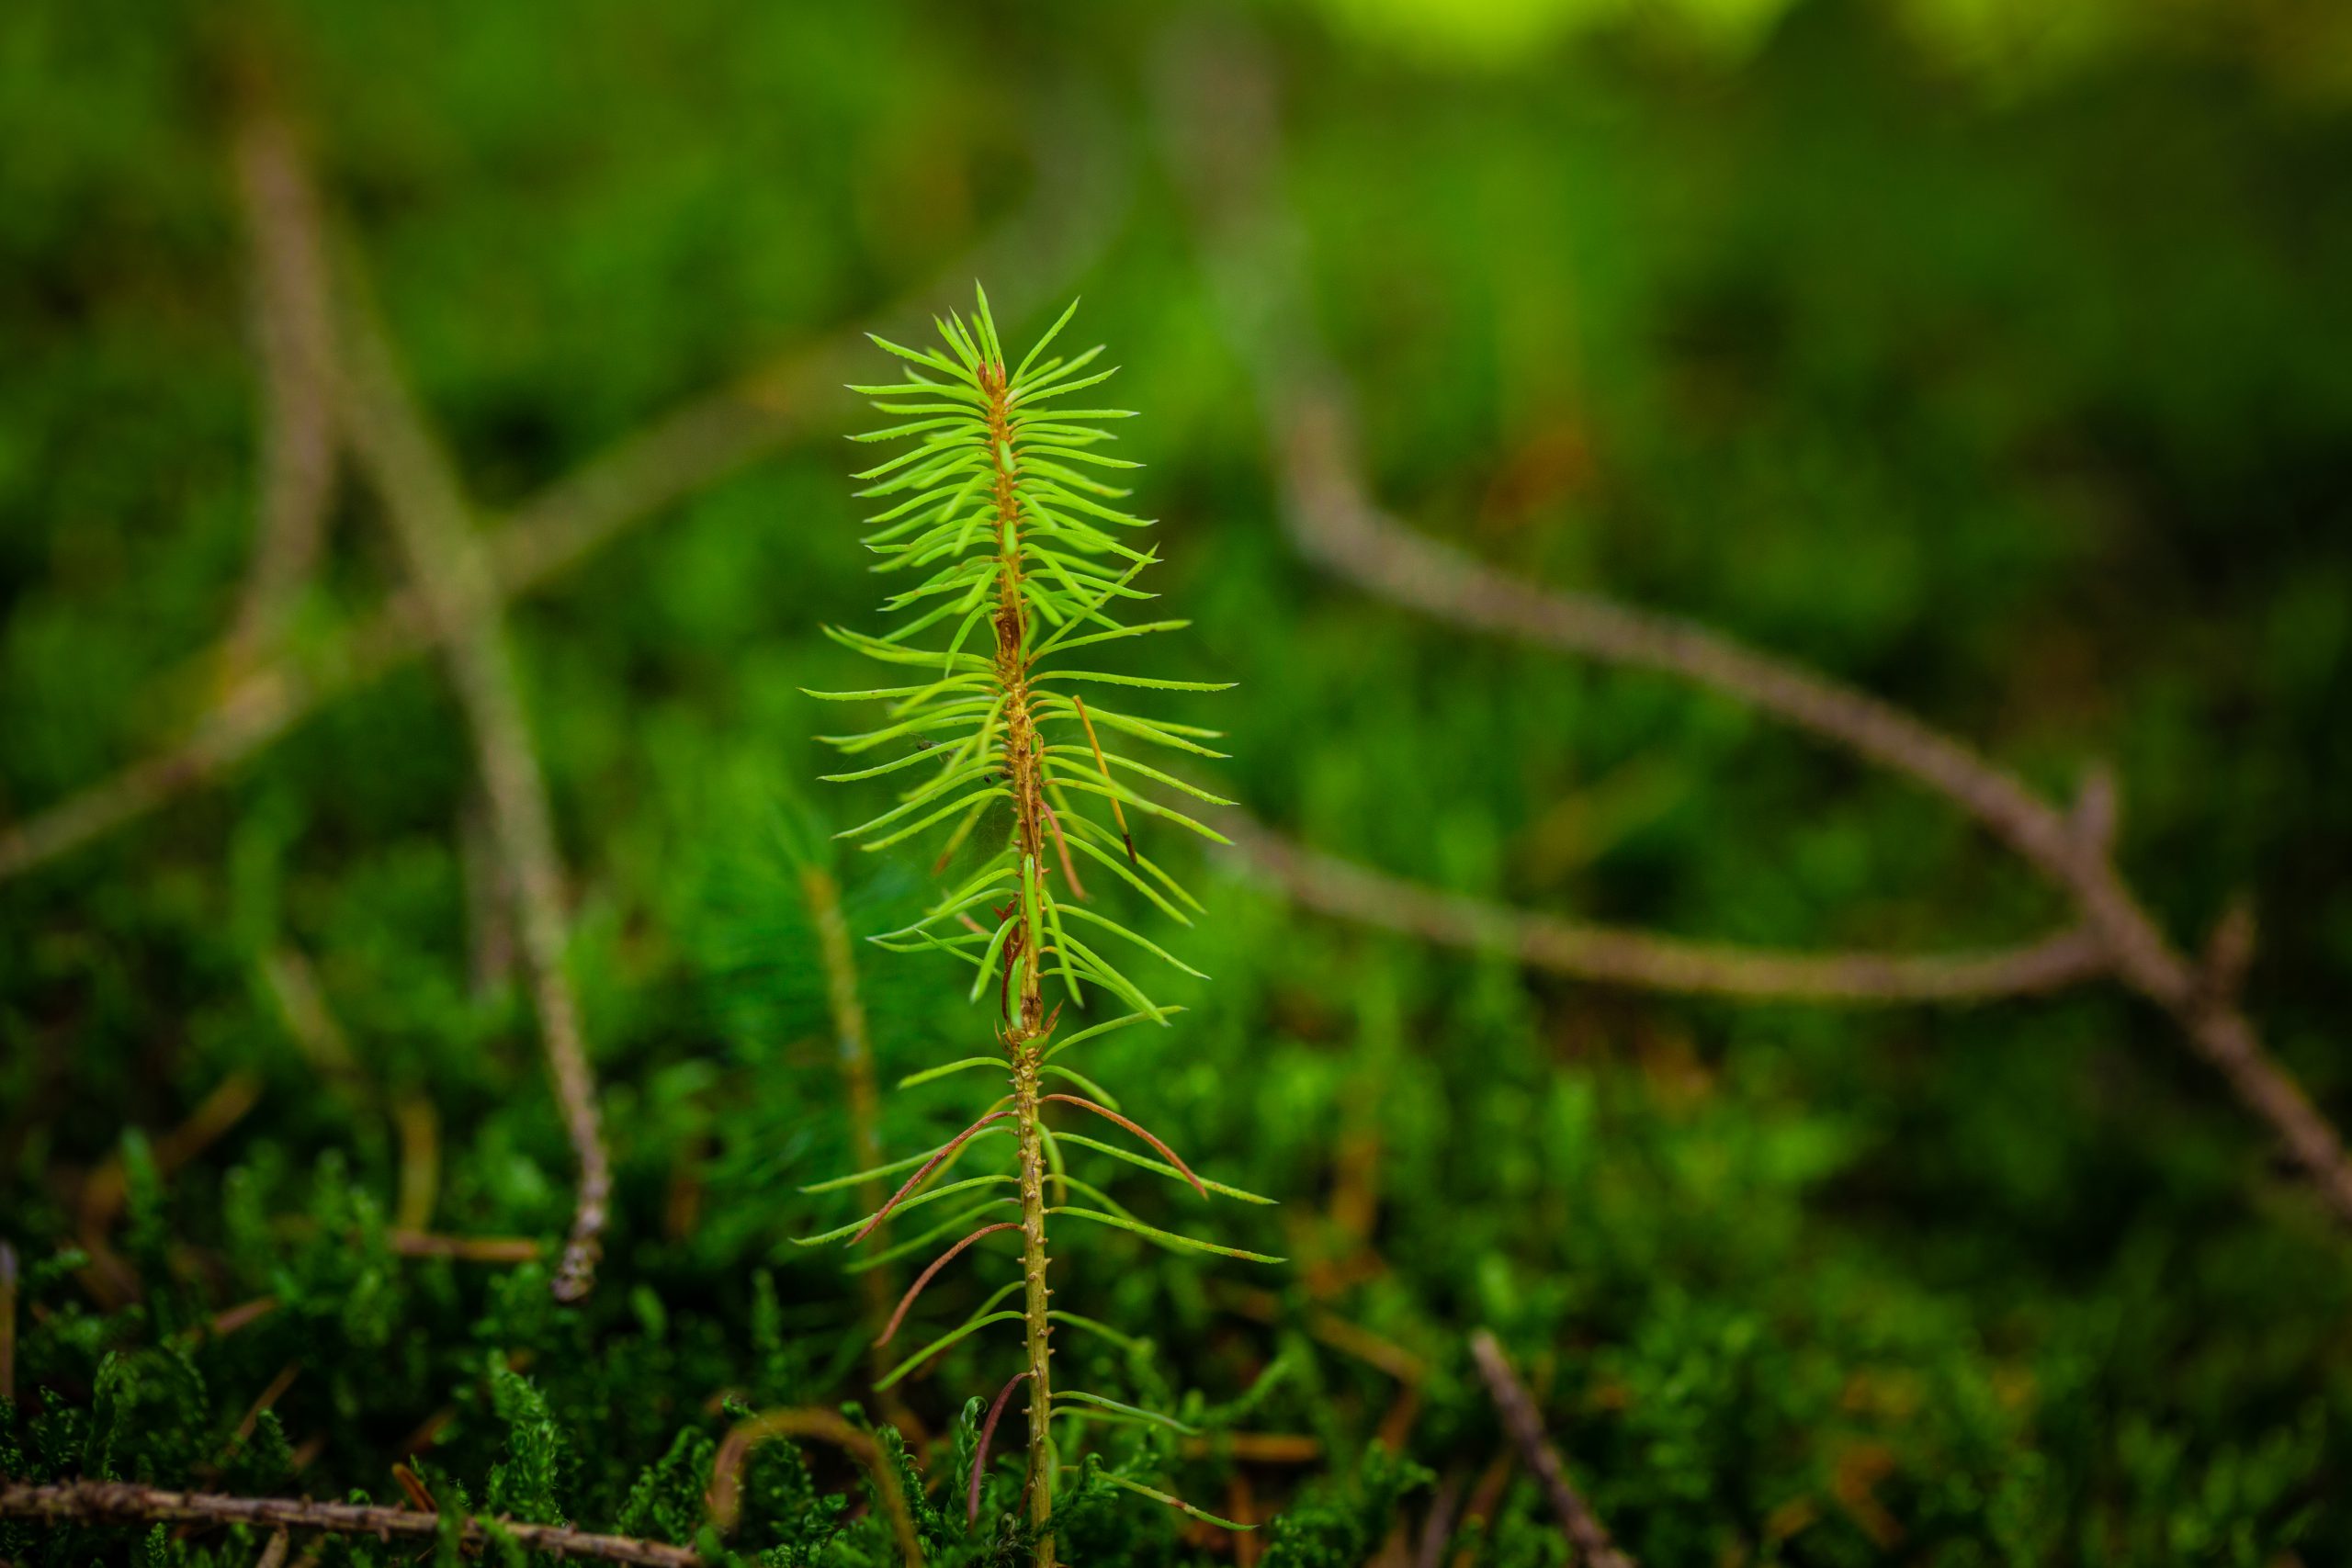 A young sapling of spruce grows in the forest ground with green moss.